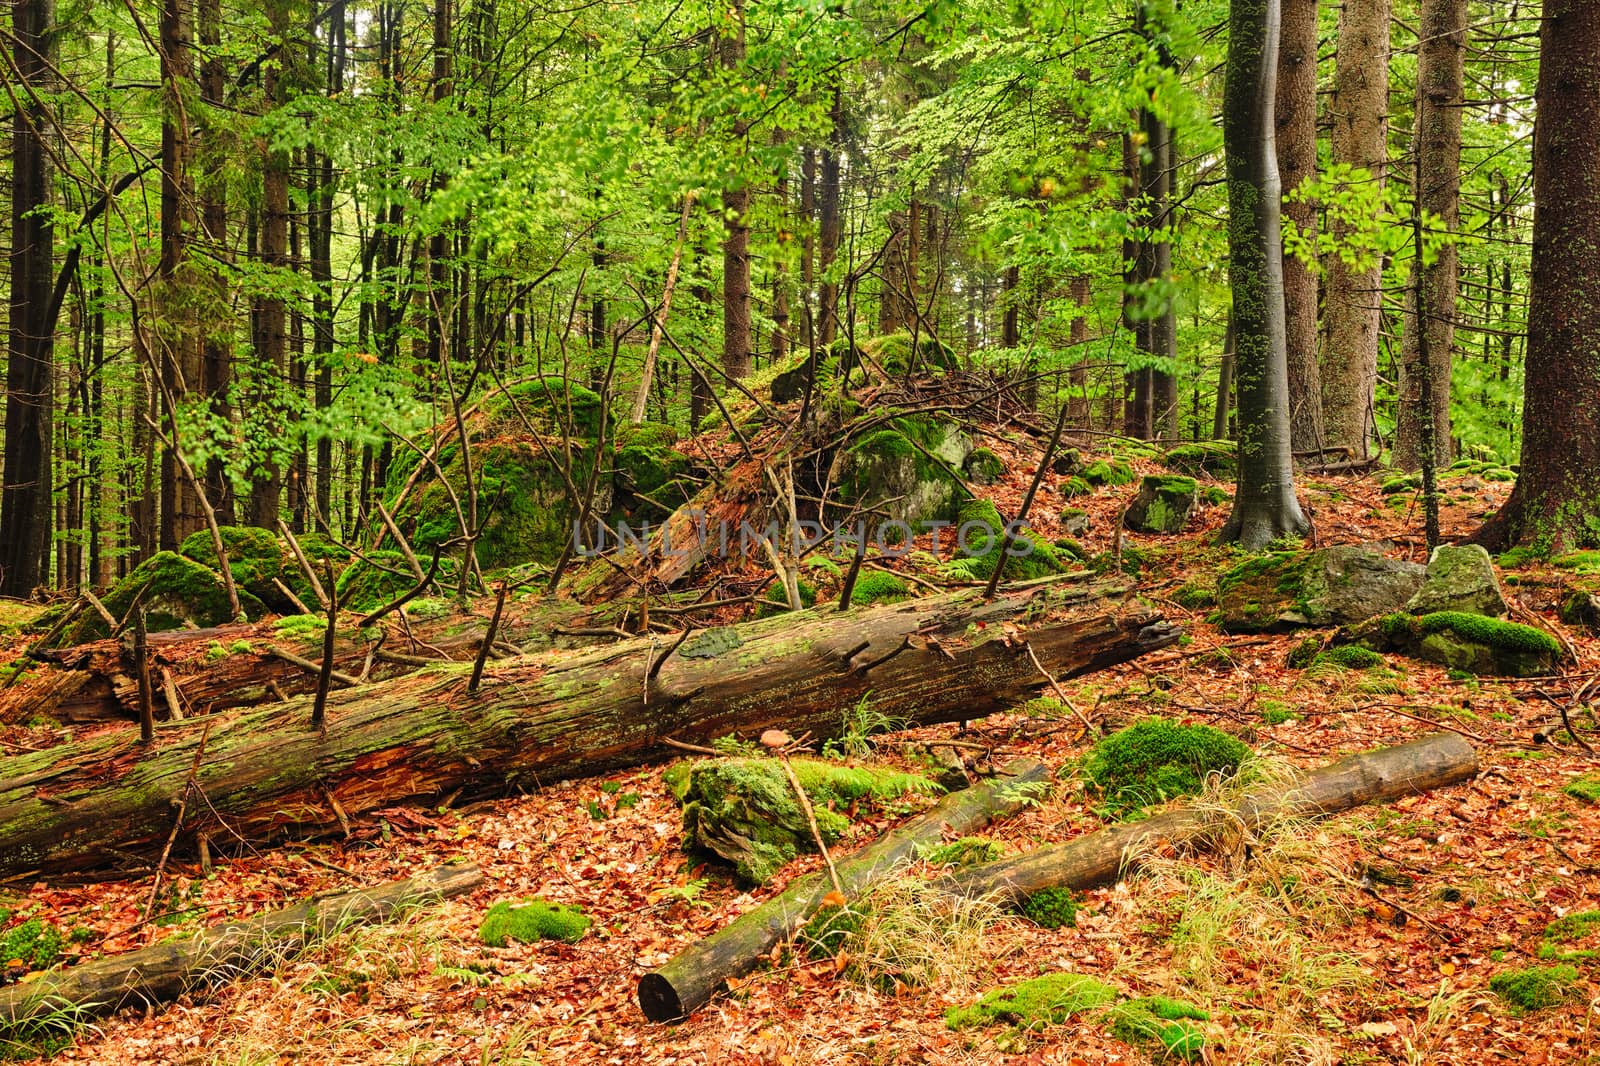 The primeval forest with mossed boulders-HDR
